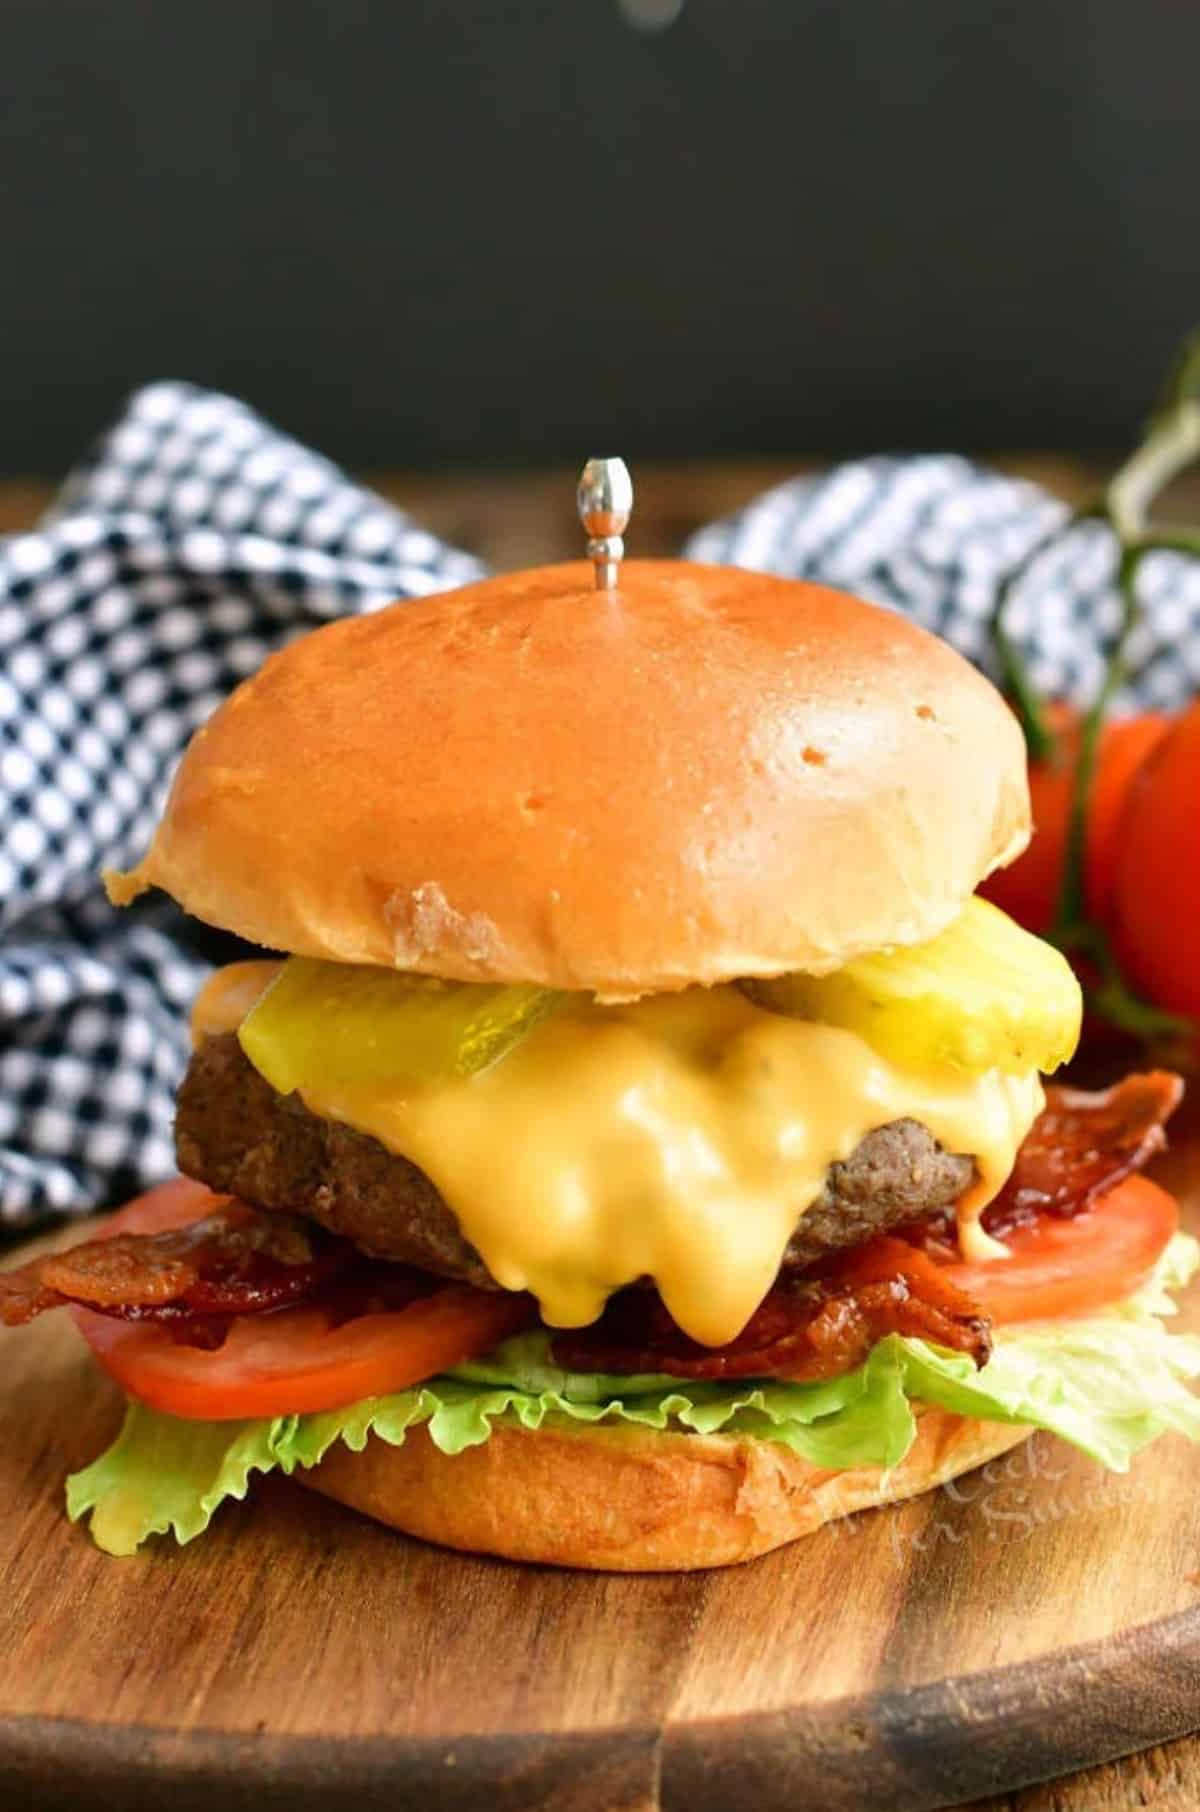 a cheeseburger with cheese, tomatoes, bacon, lettuce and pickles.